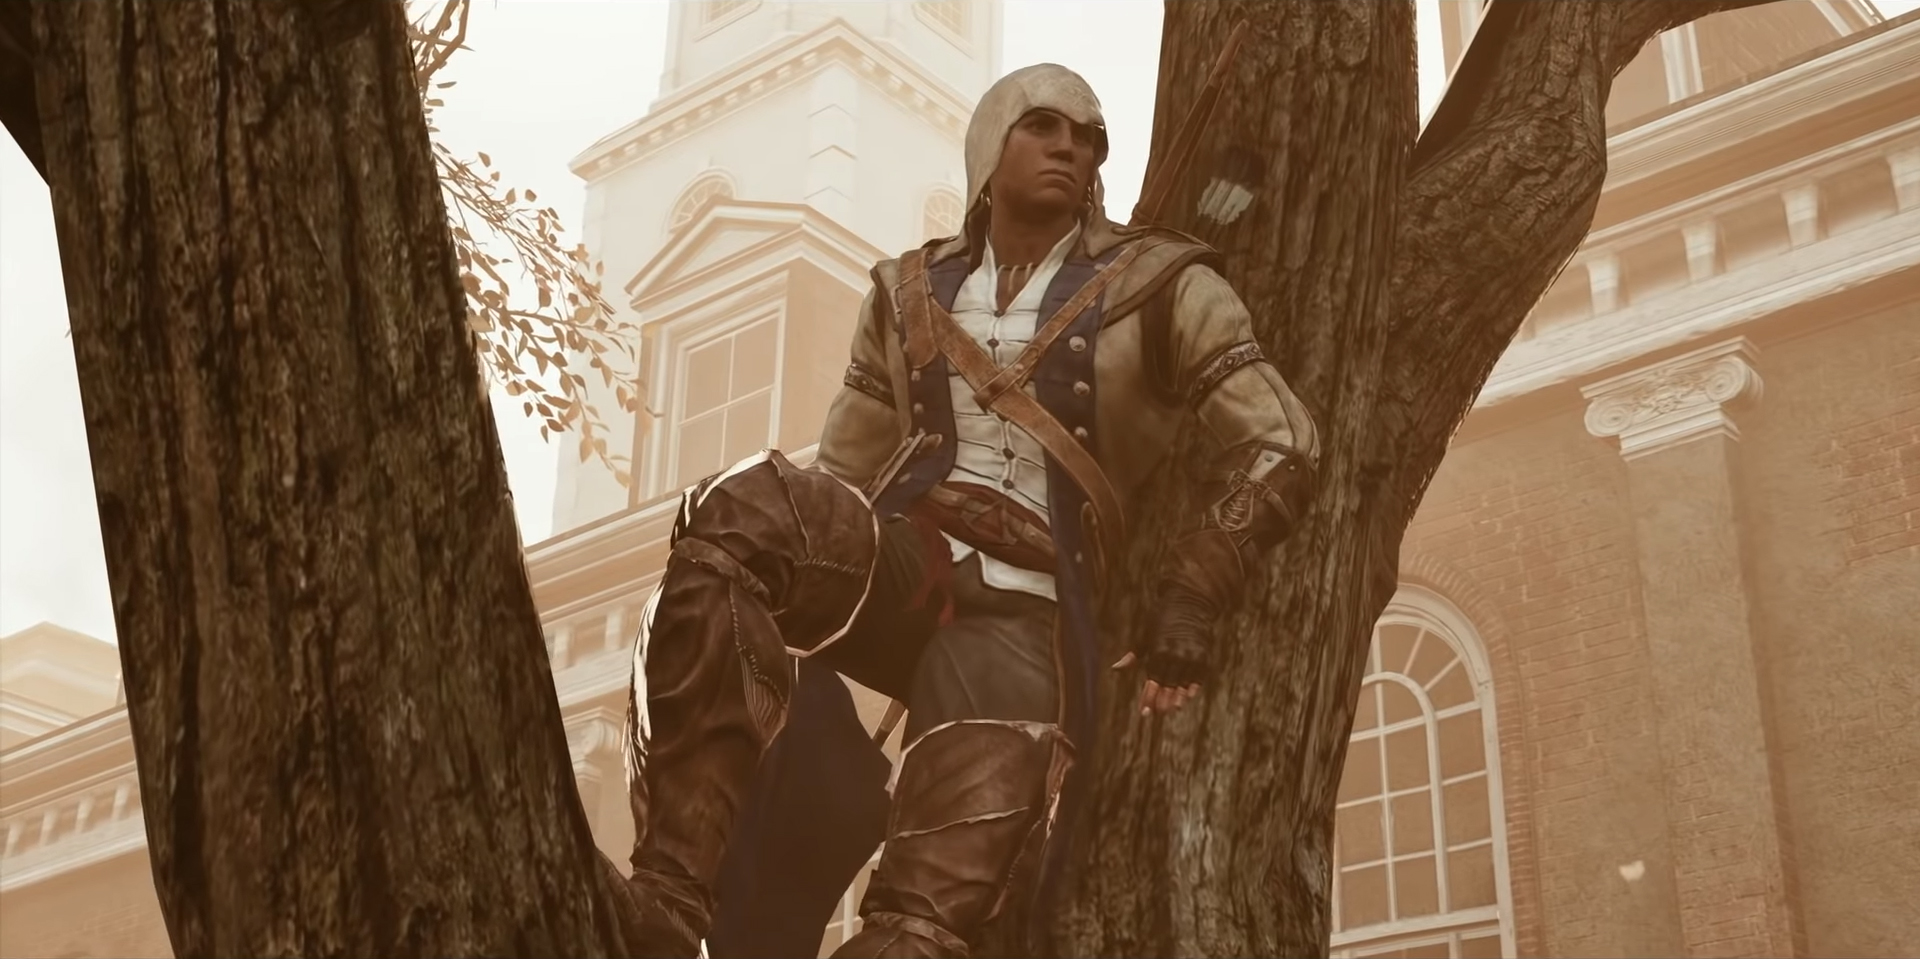 assassins creed 3 remastered free download